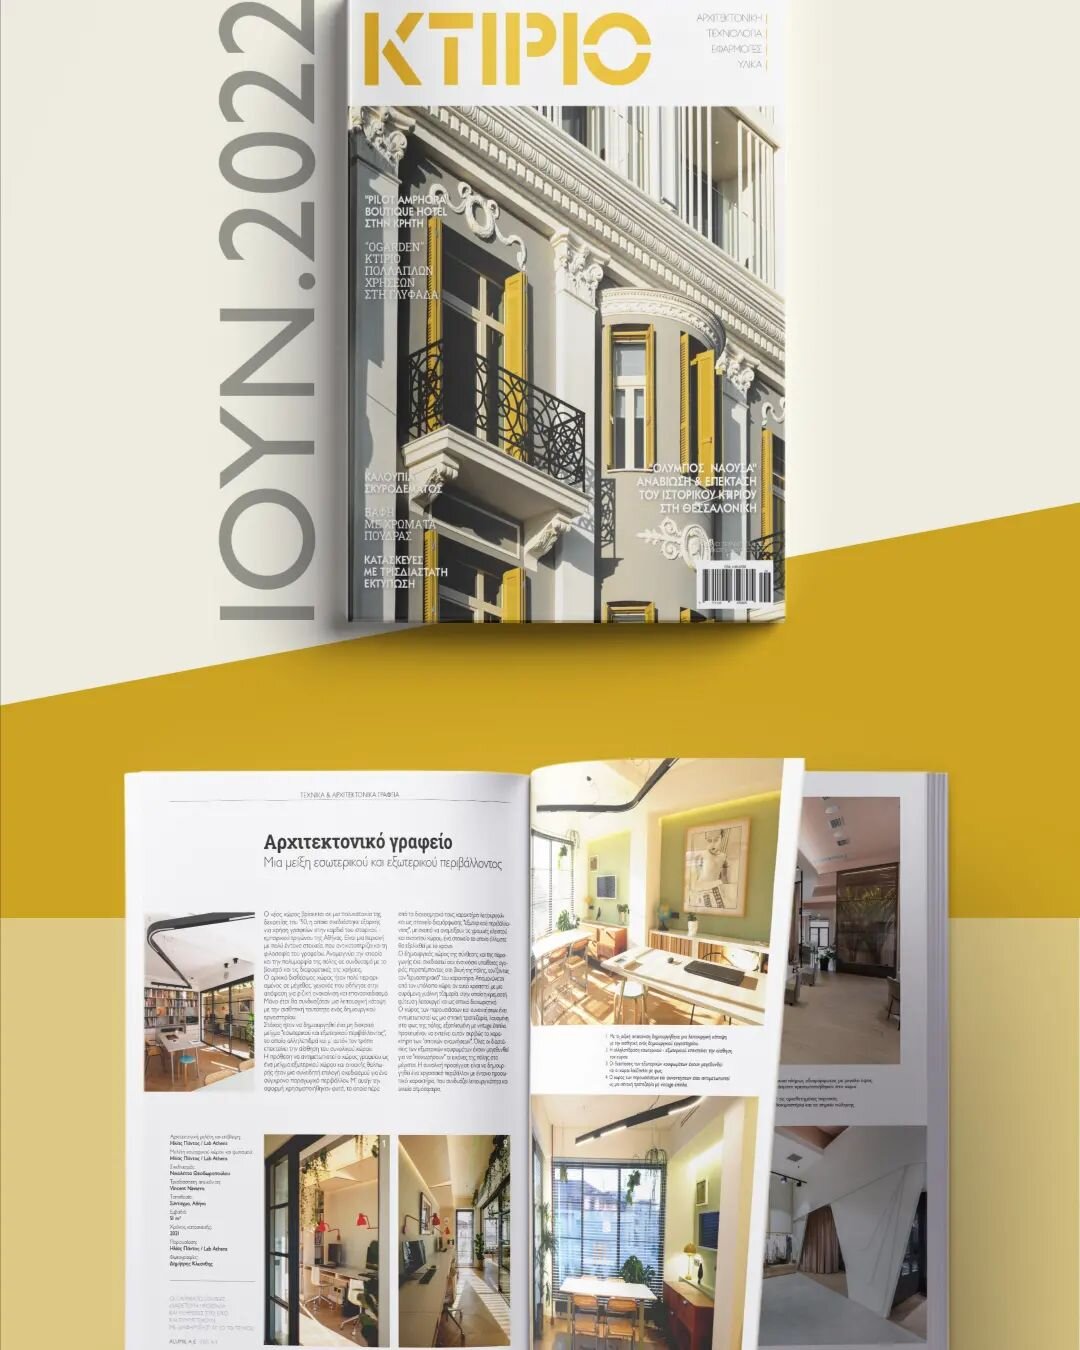 What a great honour to be published in @ktirio_editions 
Our new office space is featured in soon to be published June edition 
Thank you Ktirio ! 

Photos by @dimitriskleanthis